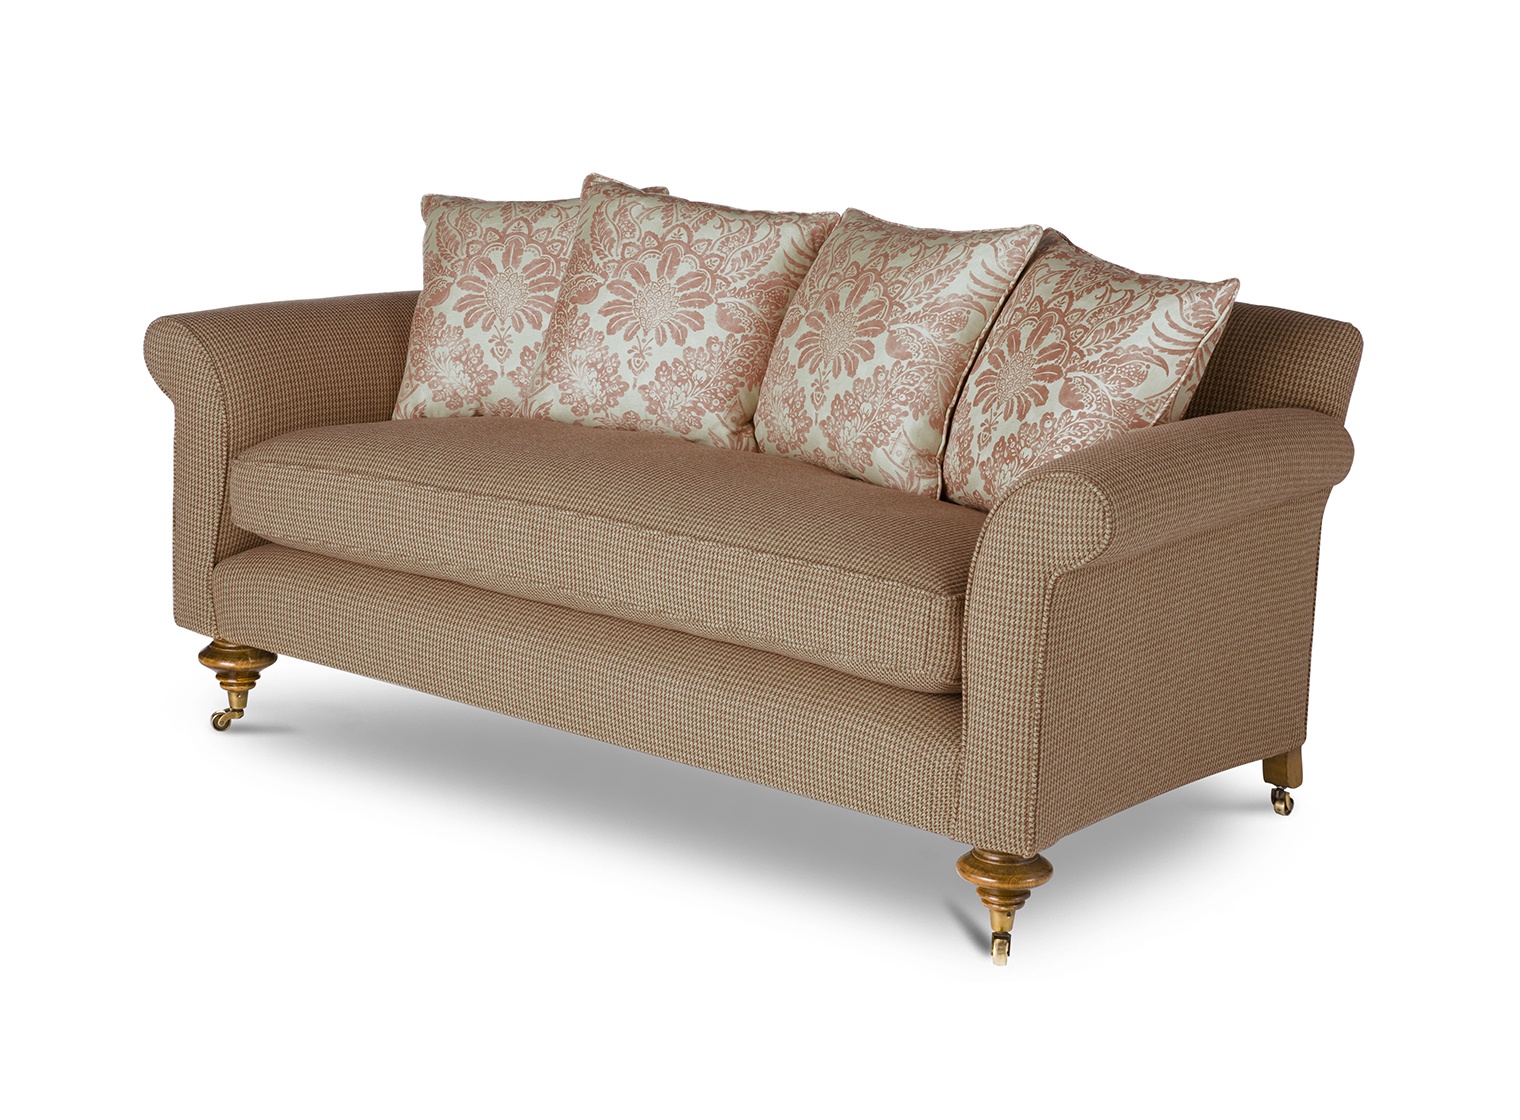 Empire 2.5 seater sofa in Argyll check - Ember red - Beaumont & Fletcher